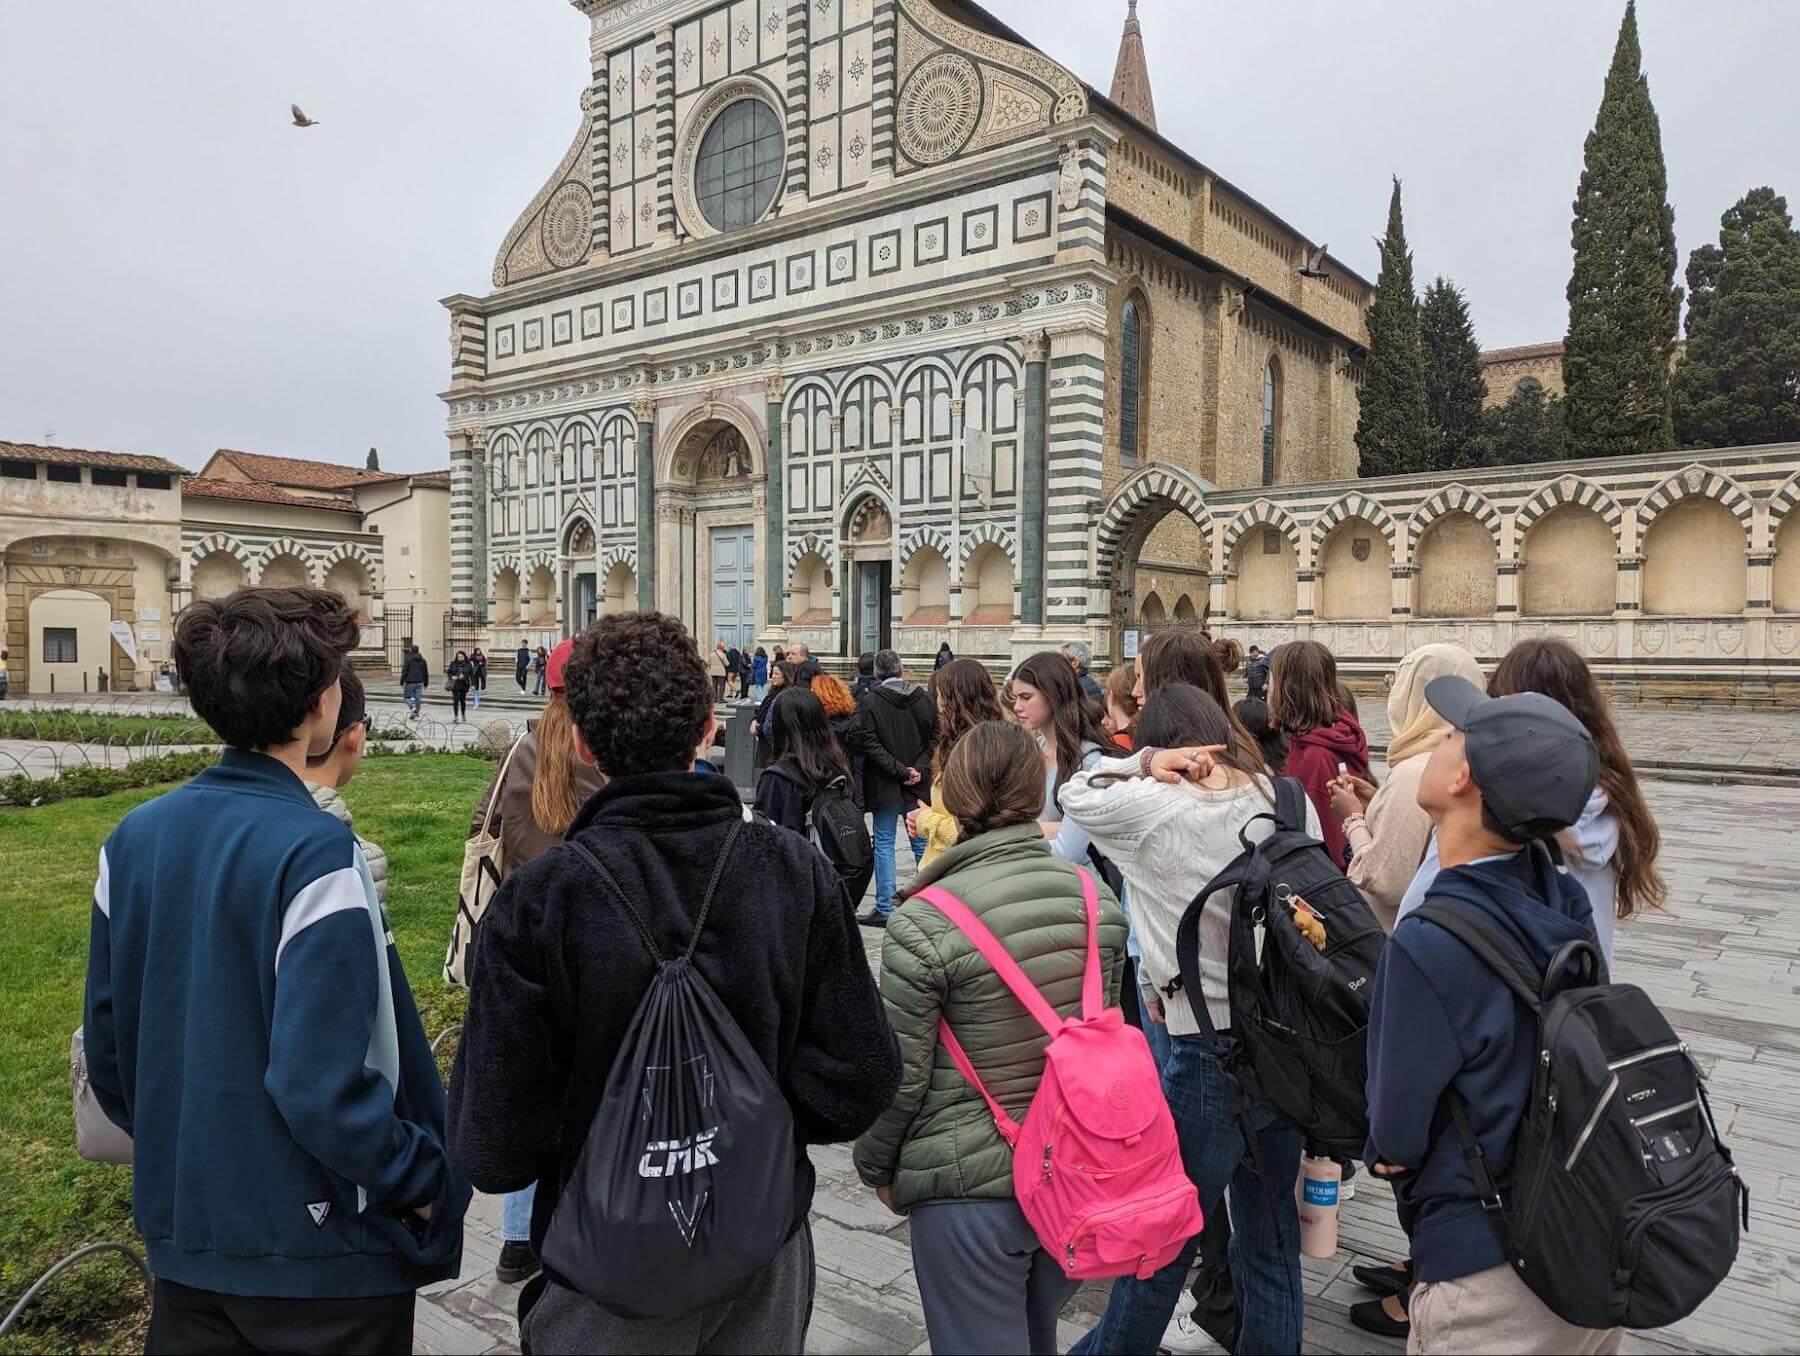 Ethical Culture Fieldston School students travel abroad.